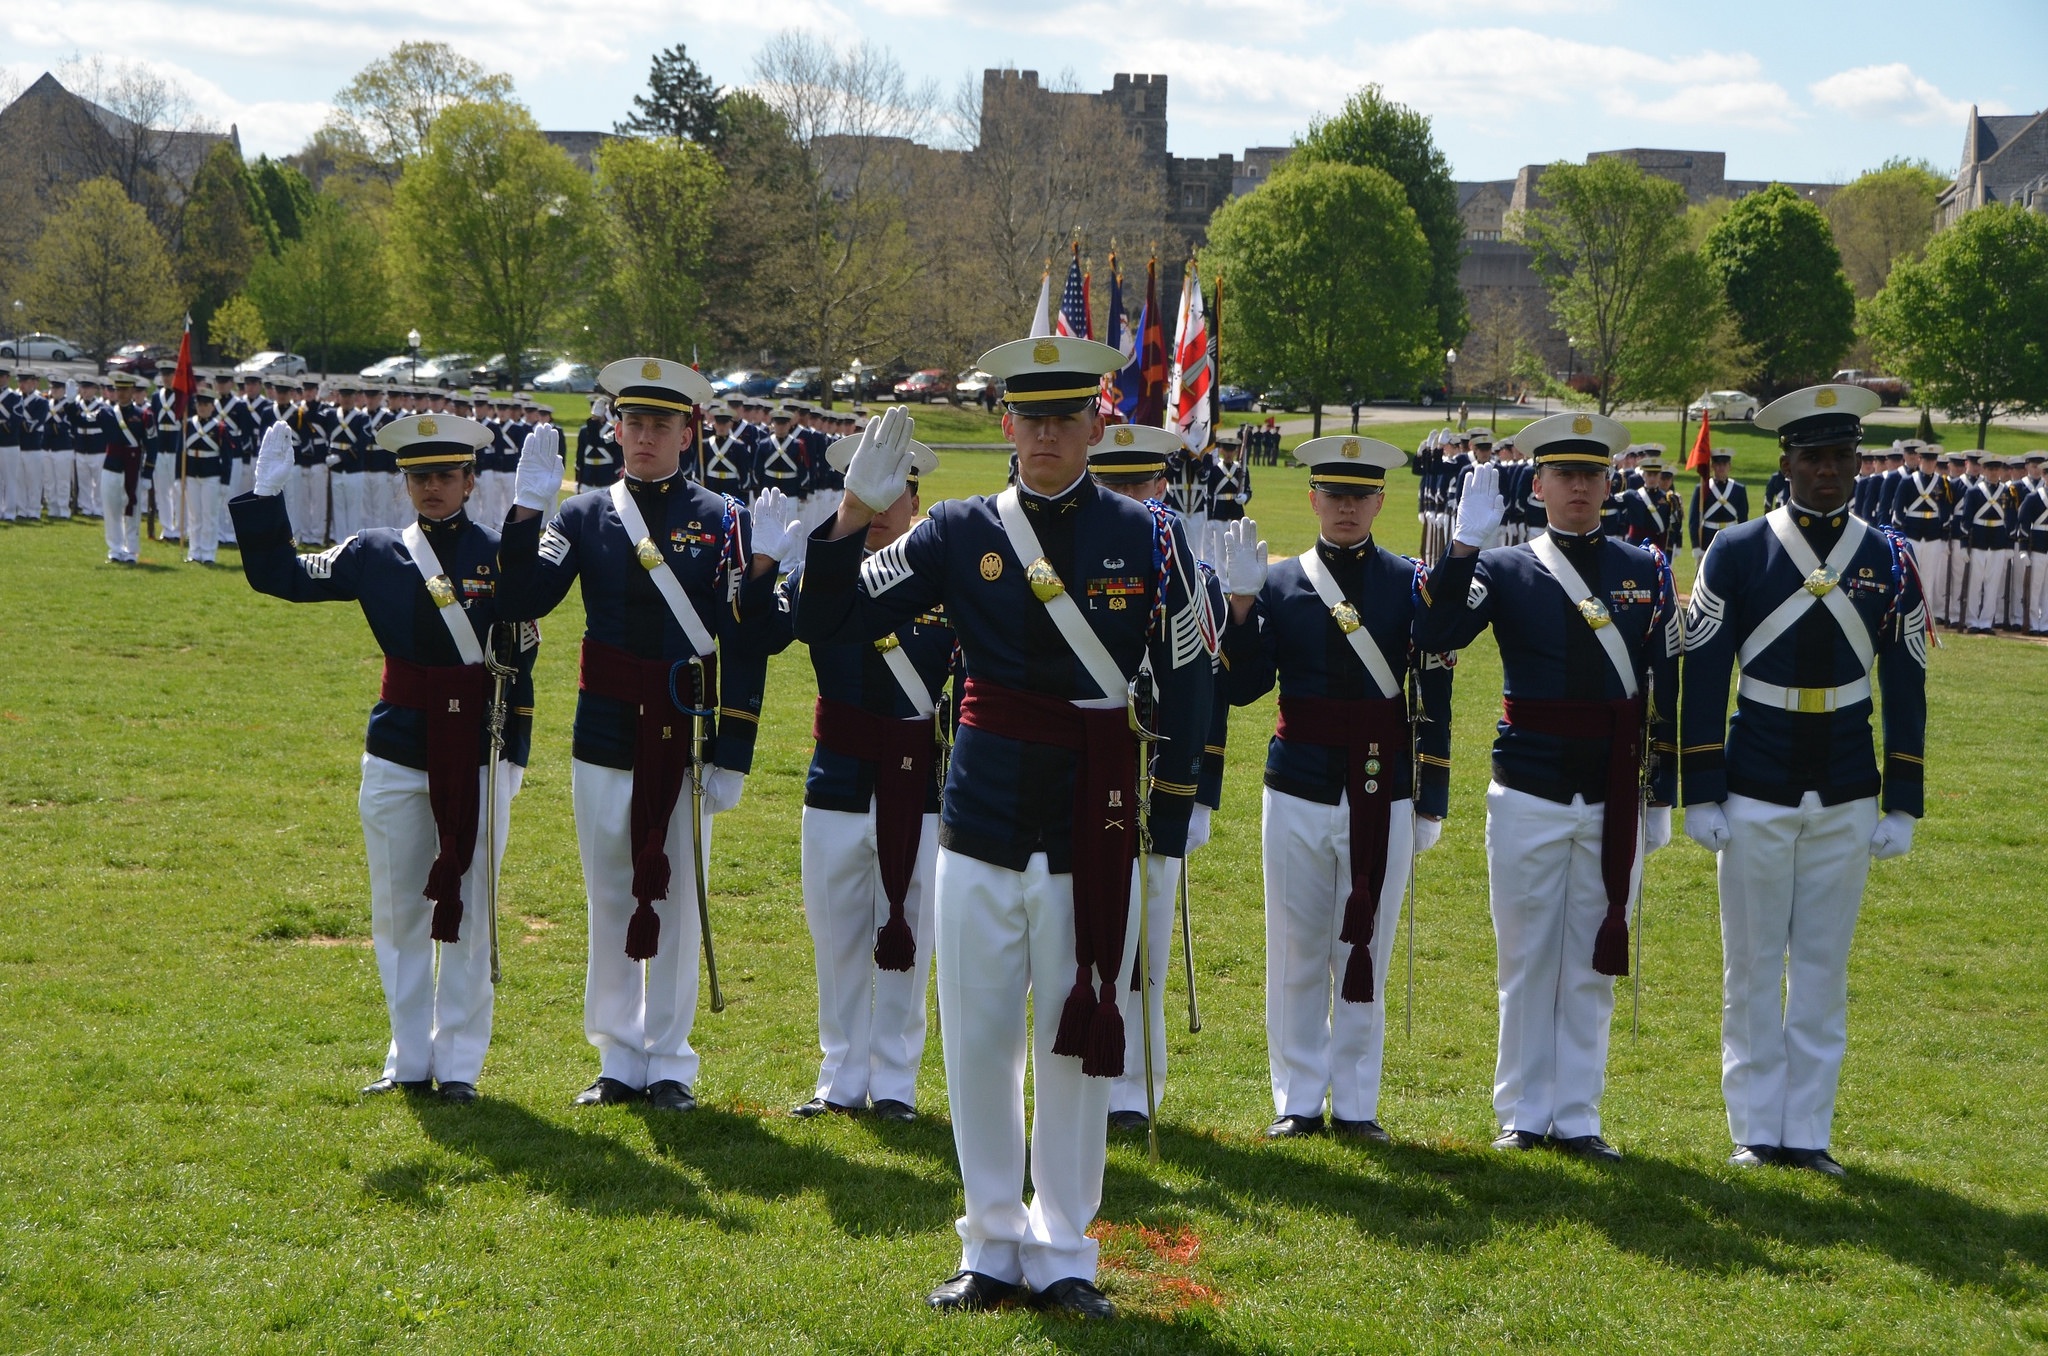 The Class of 2015 taking the cadet officer oath on the Drillfield during the Change of Command Parade upon taking over command last spring.